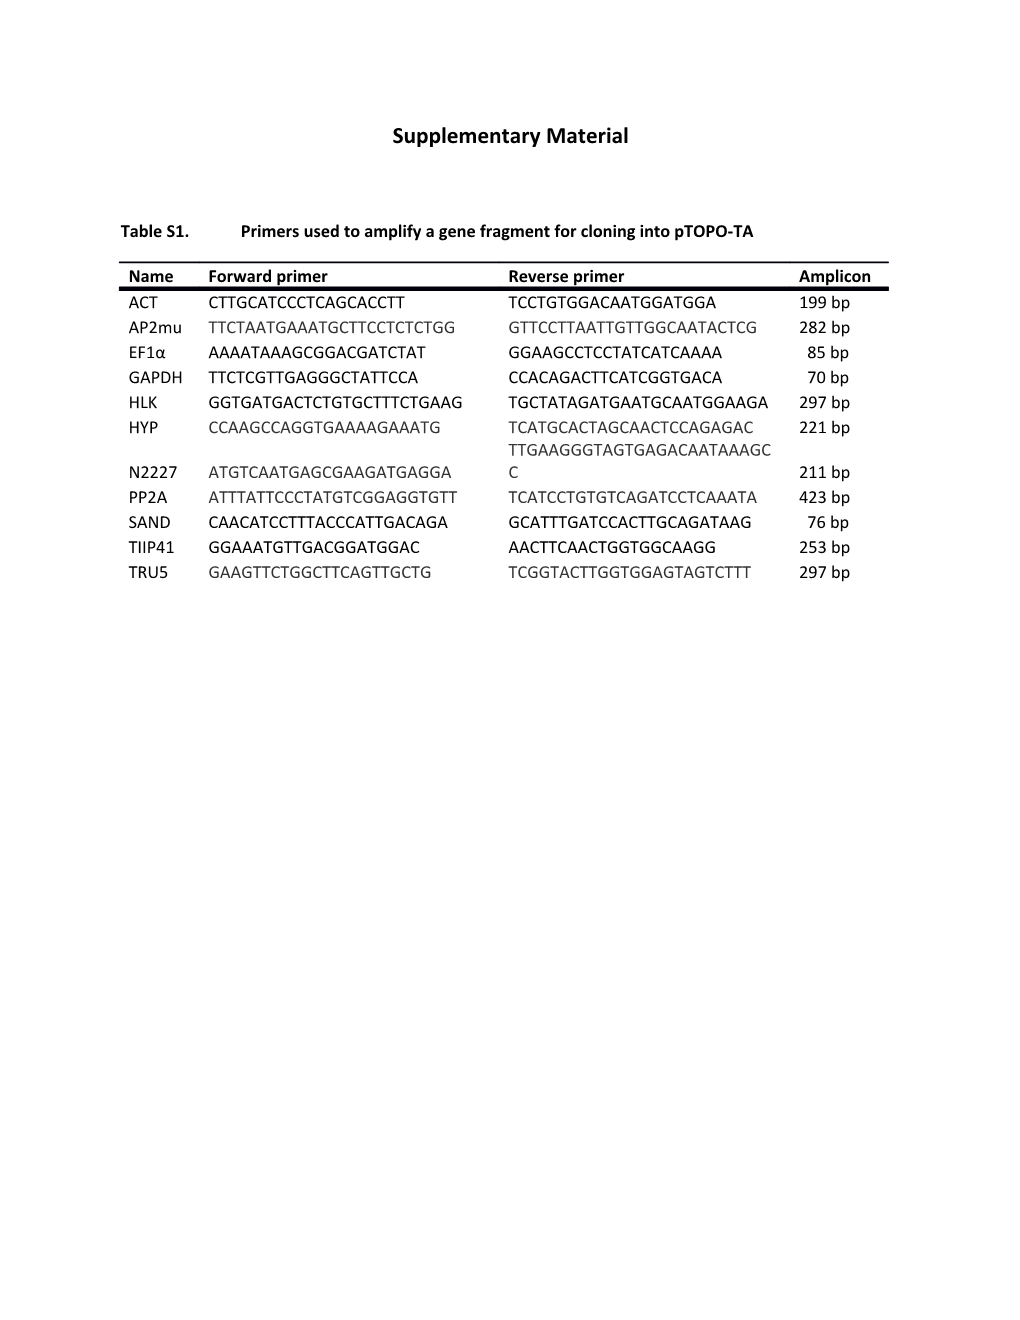 Table S1.Primers Used to Amplify a Gene Fragment for Cloning Into Ptopo-TA